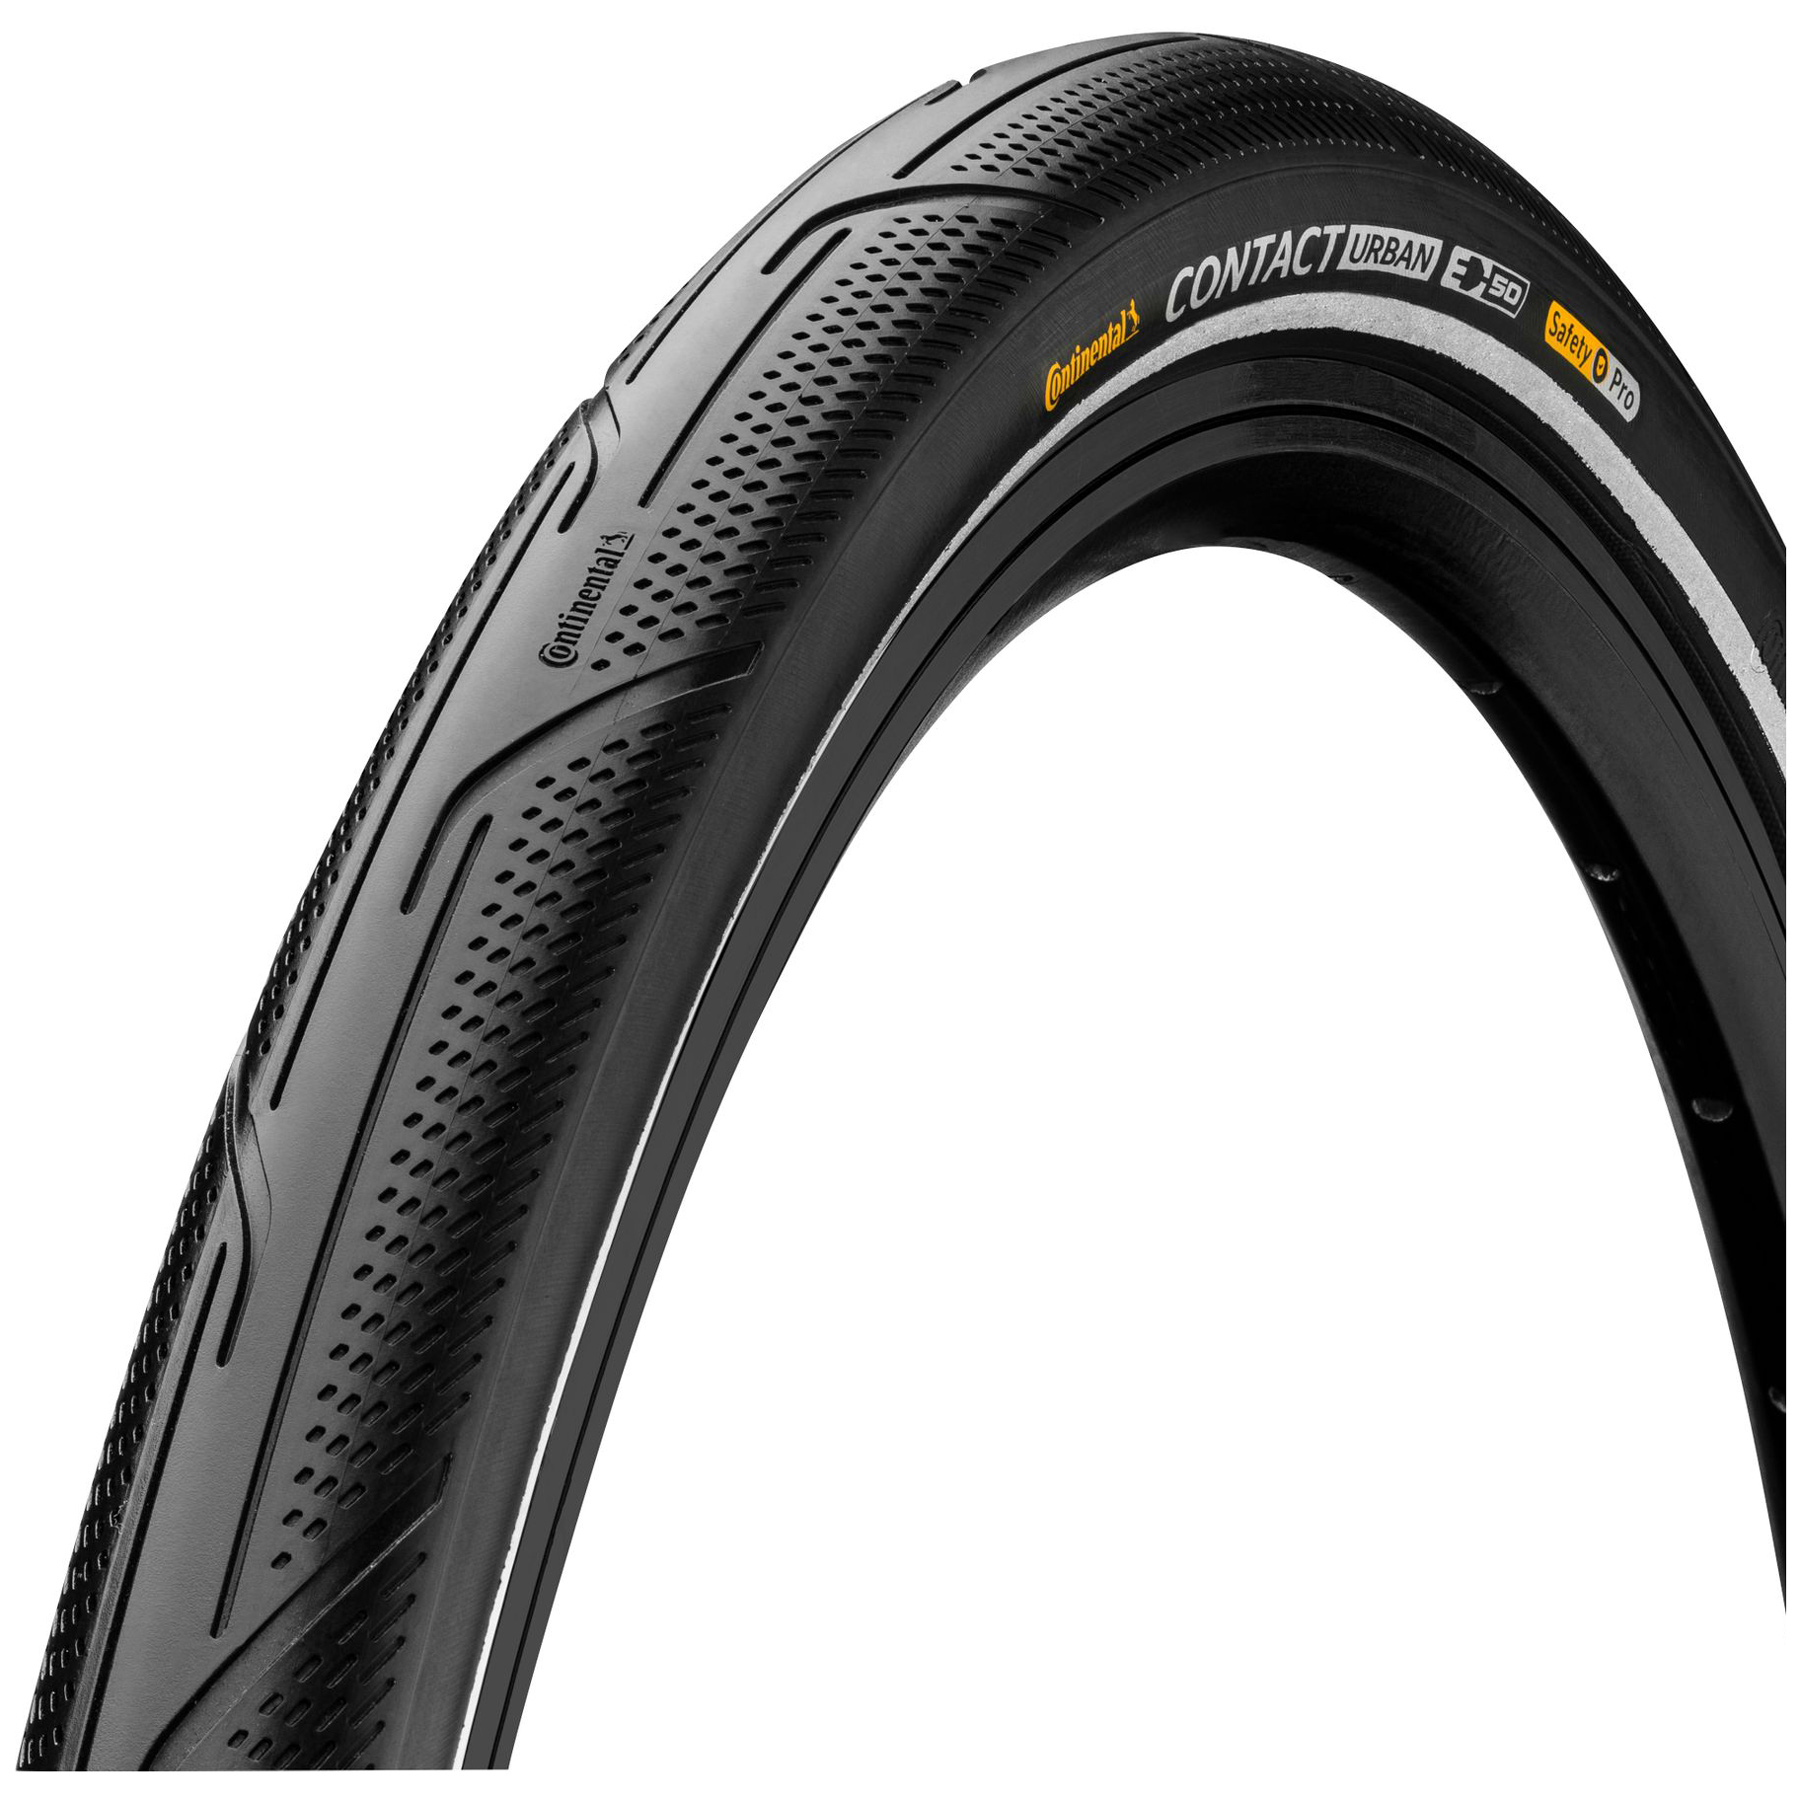 Picture of Continental Contact Urban Wire Bead Tire - PureGrip | black reflective - ECE-R75 - 32-622